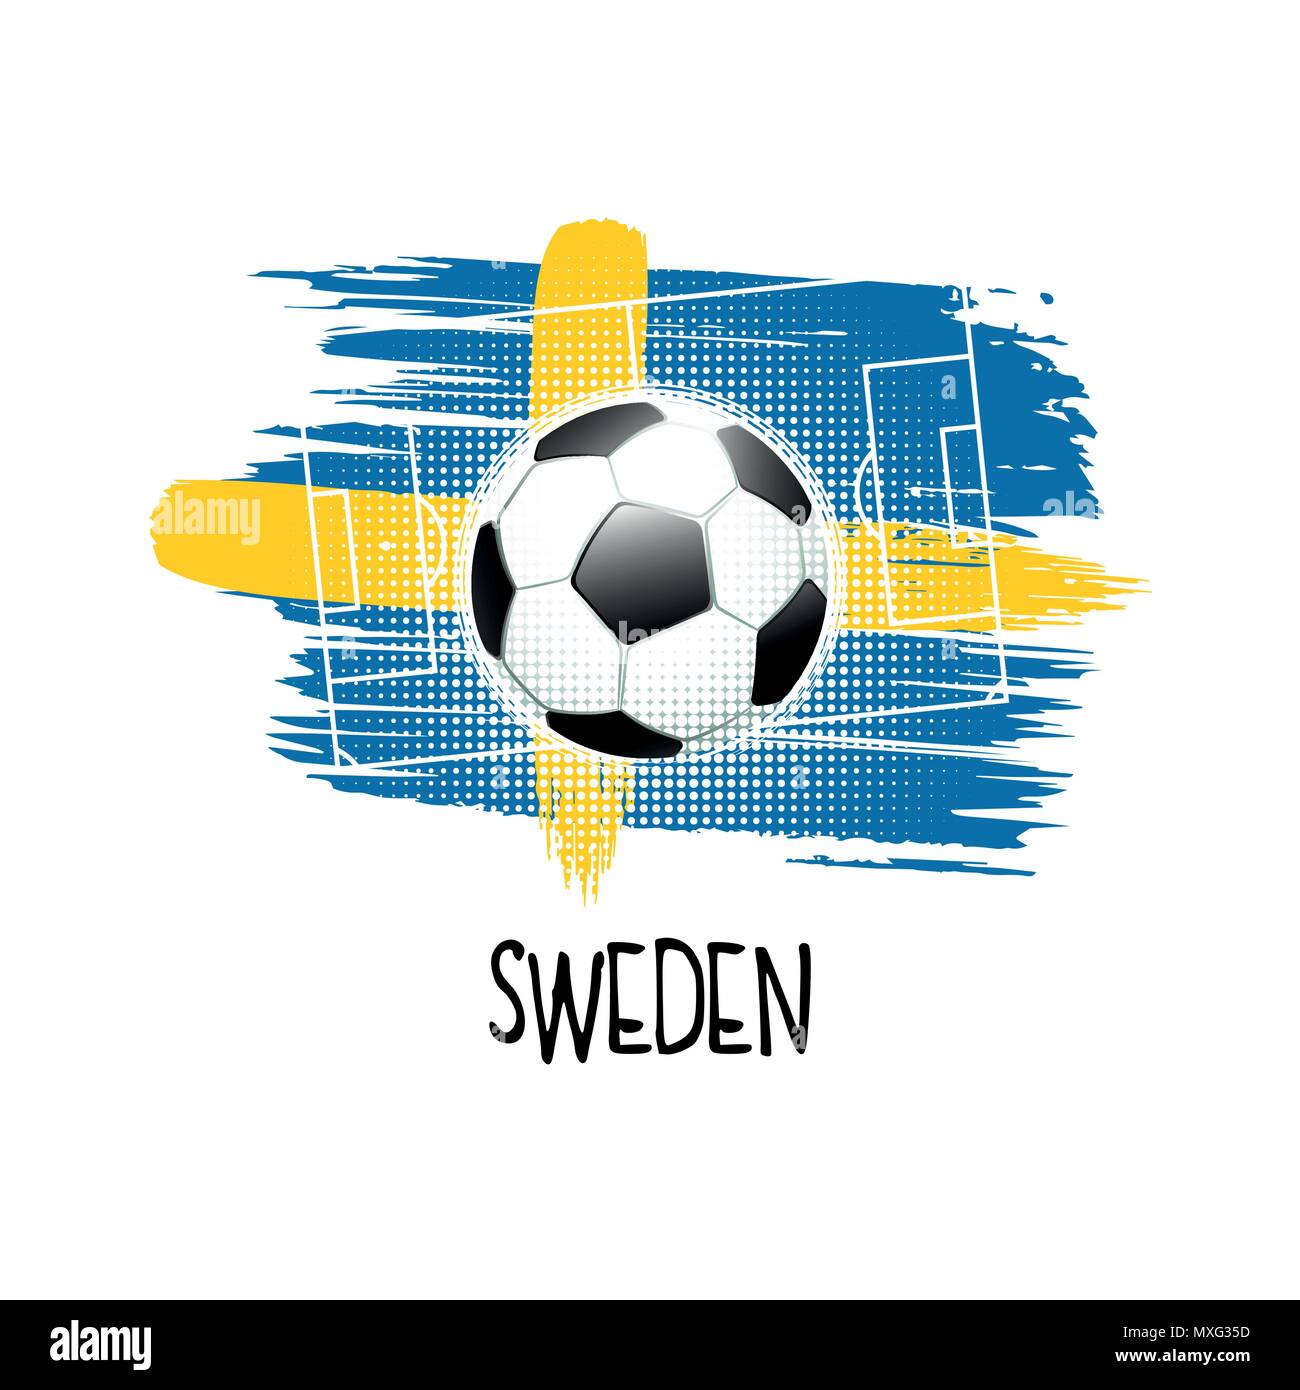 Hand written word 'Sweden' with soccer ball, soccer field and abstract colors of the Swedish flag. Vector illustration. Stock Vector